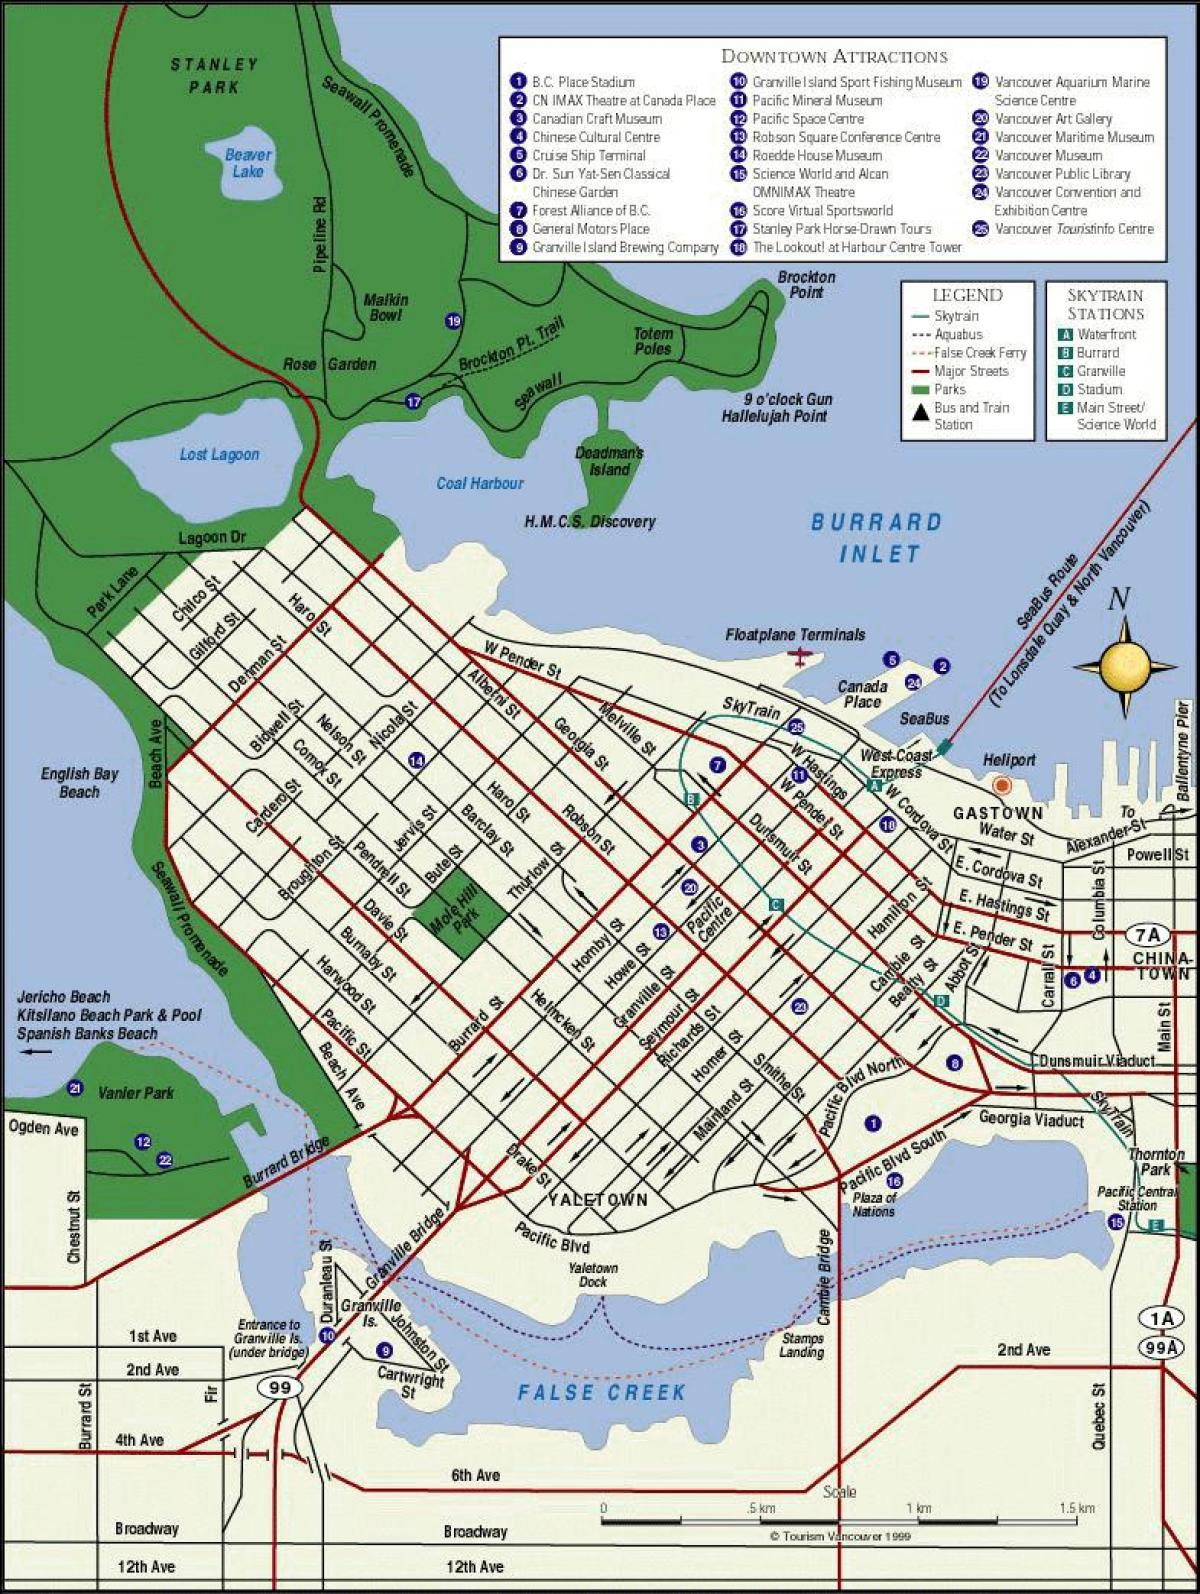 vancouver bc attractions map